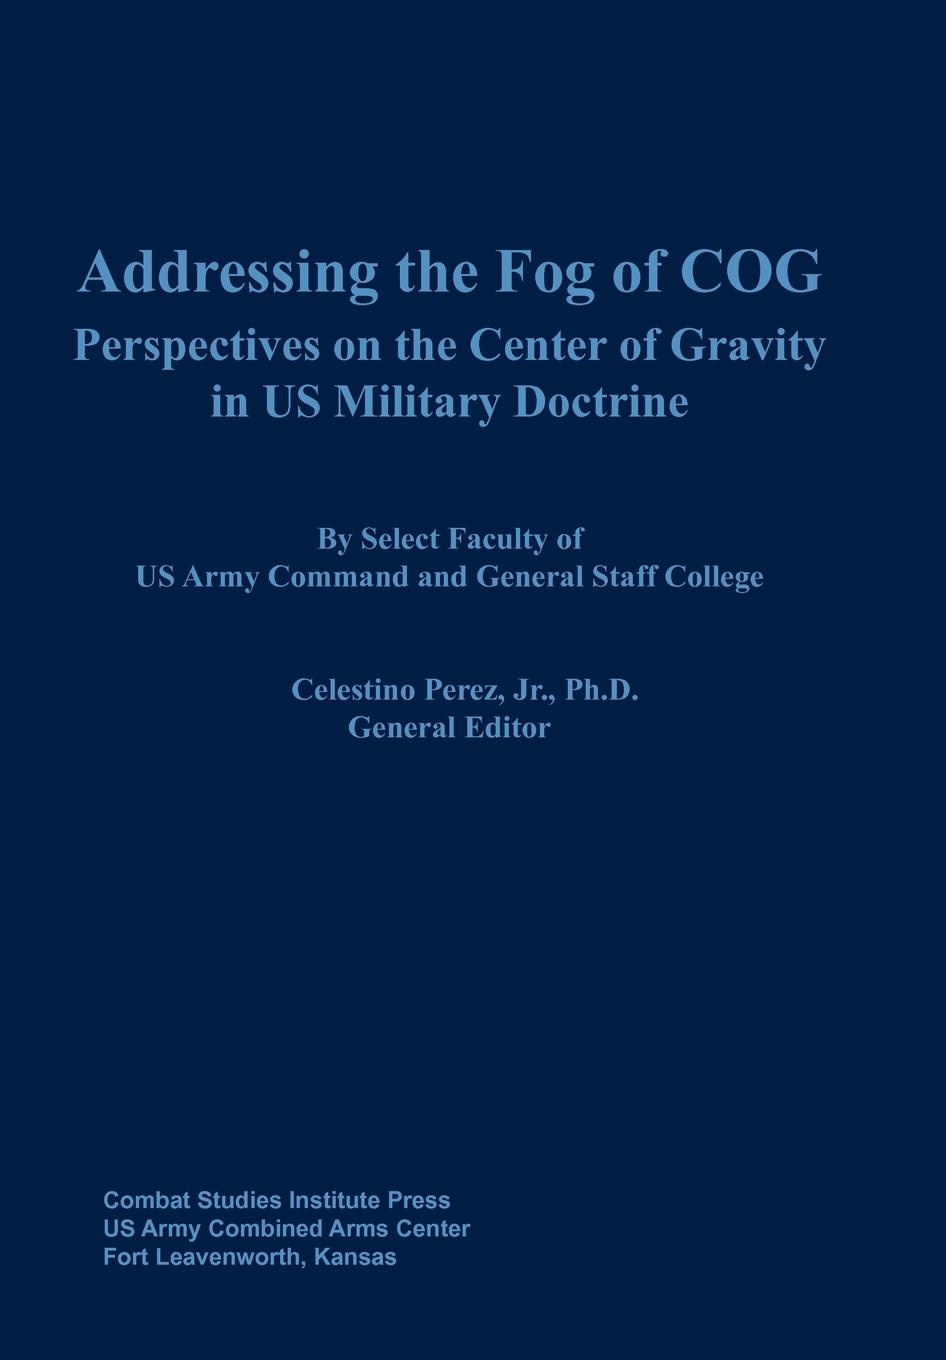 Addressing the Fog of COG. Perspectives on the Center of Gravity in US Military Doctrine